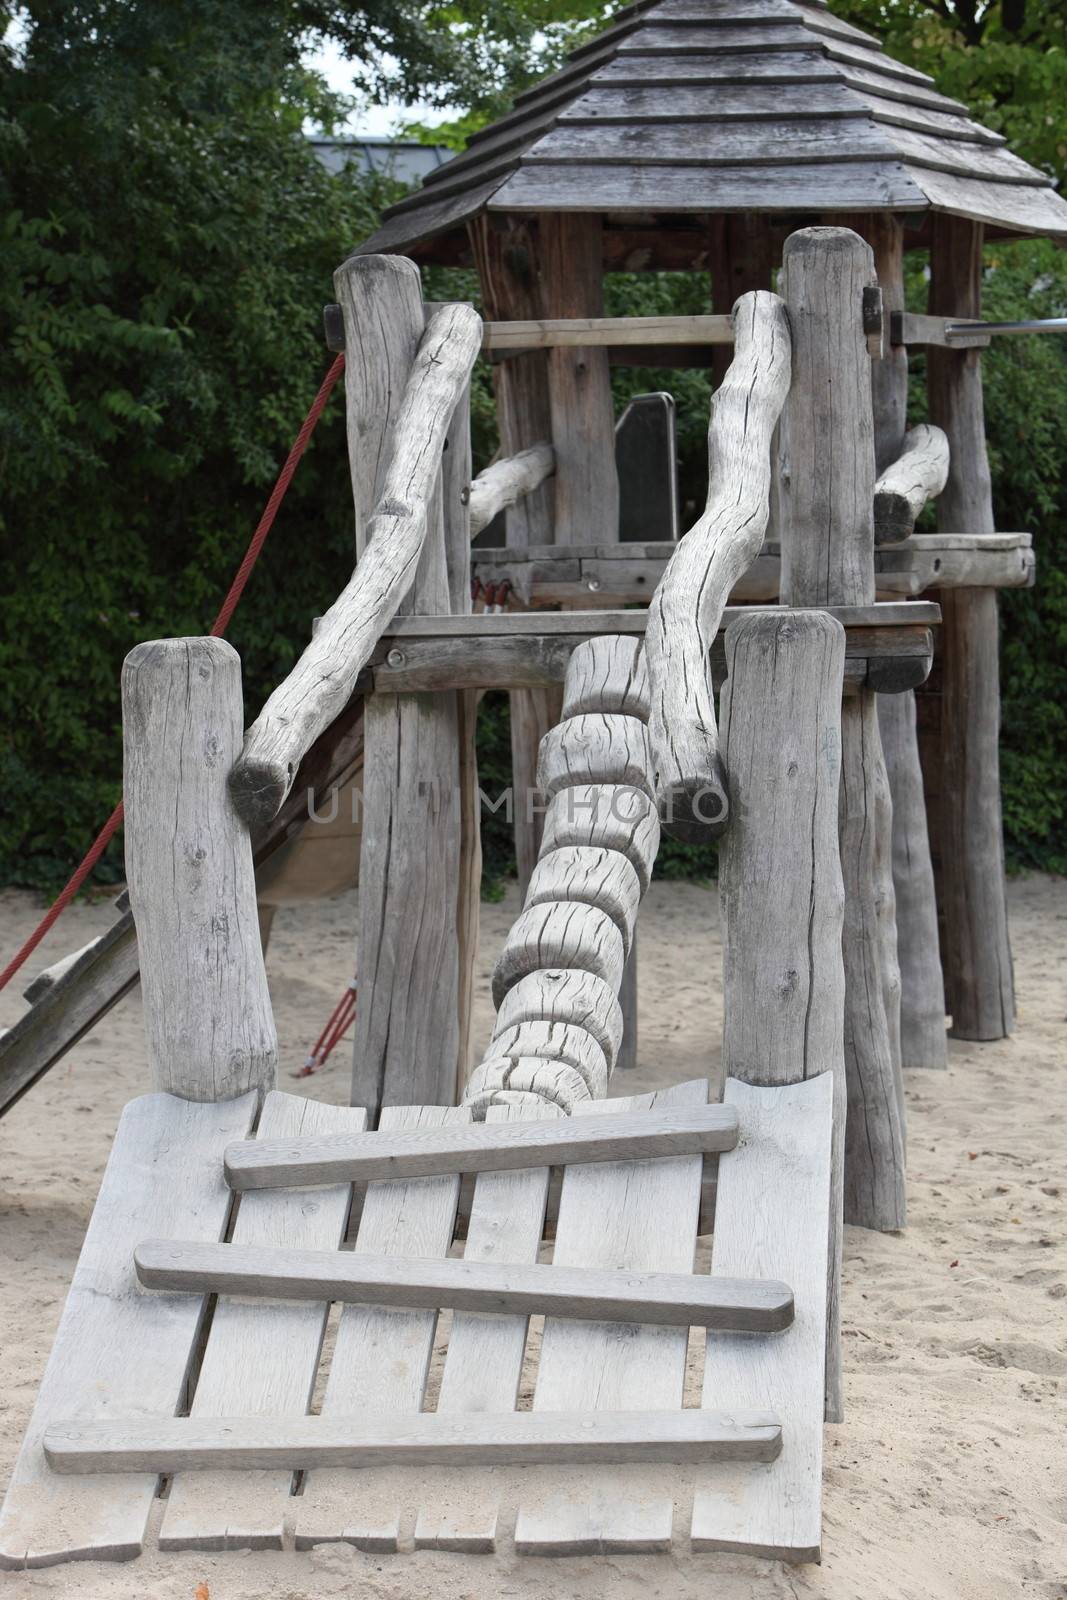 Rustic wooden playground equipment by Farina6000